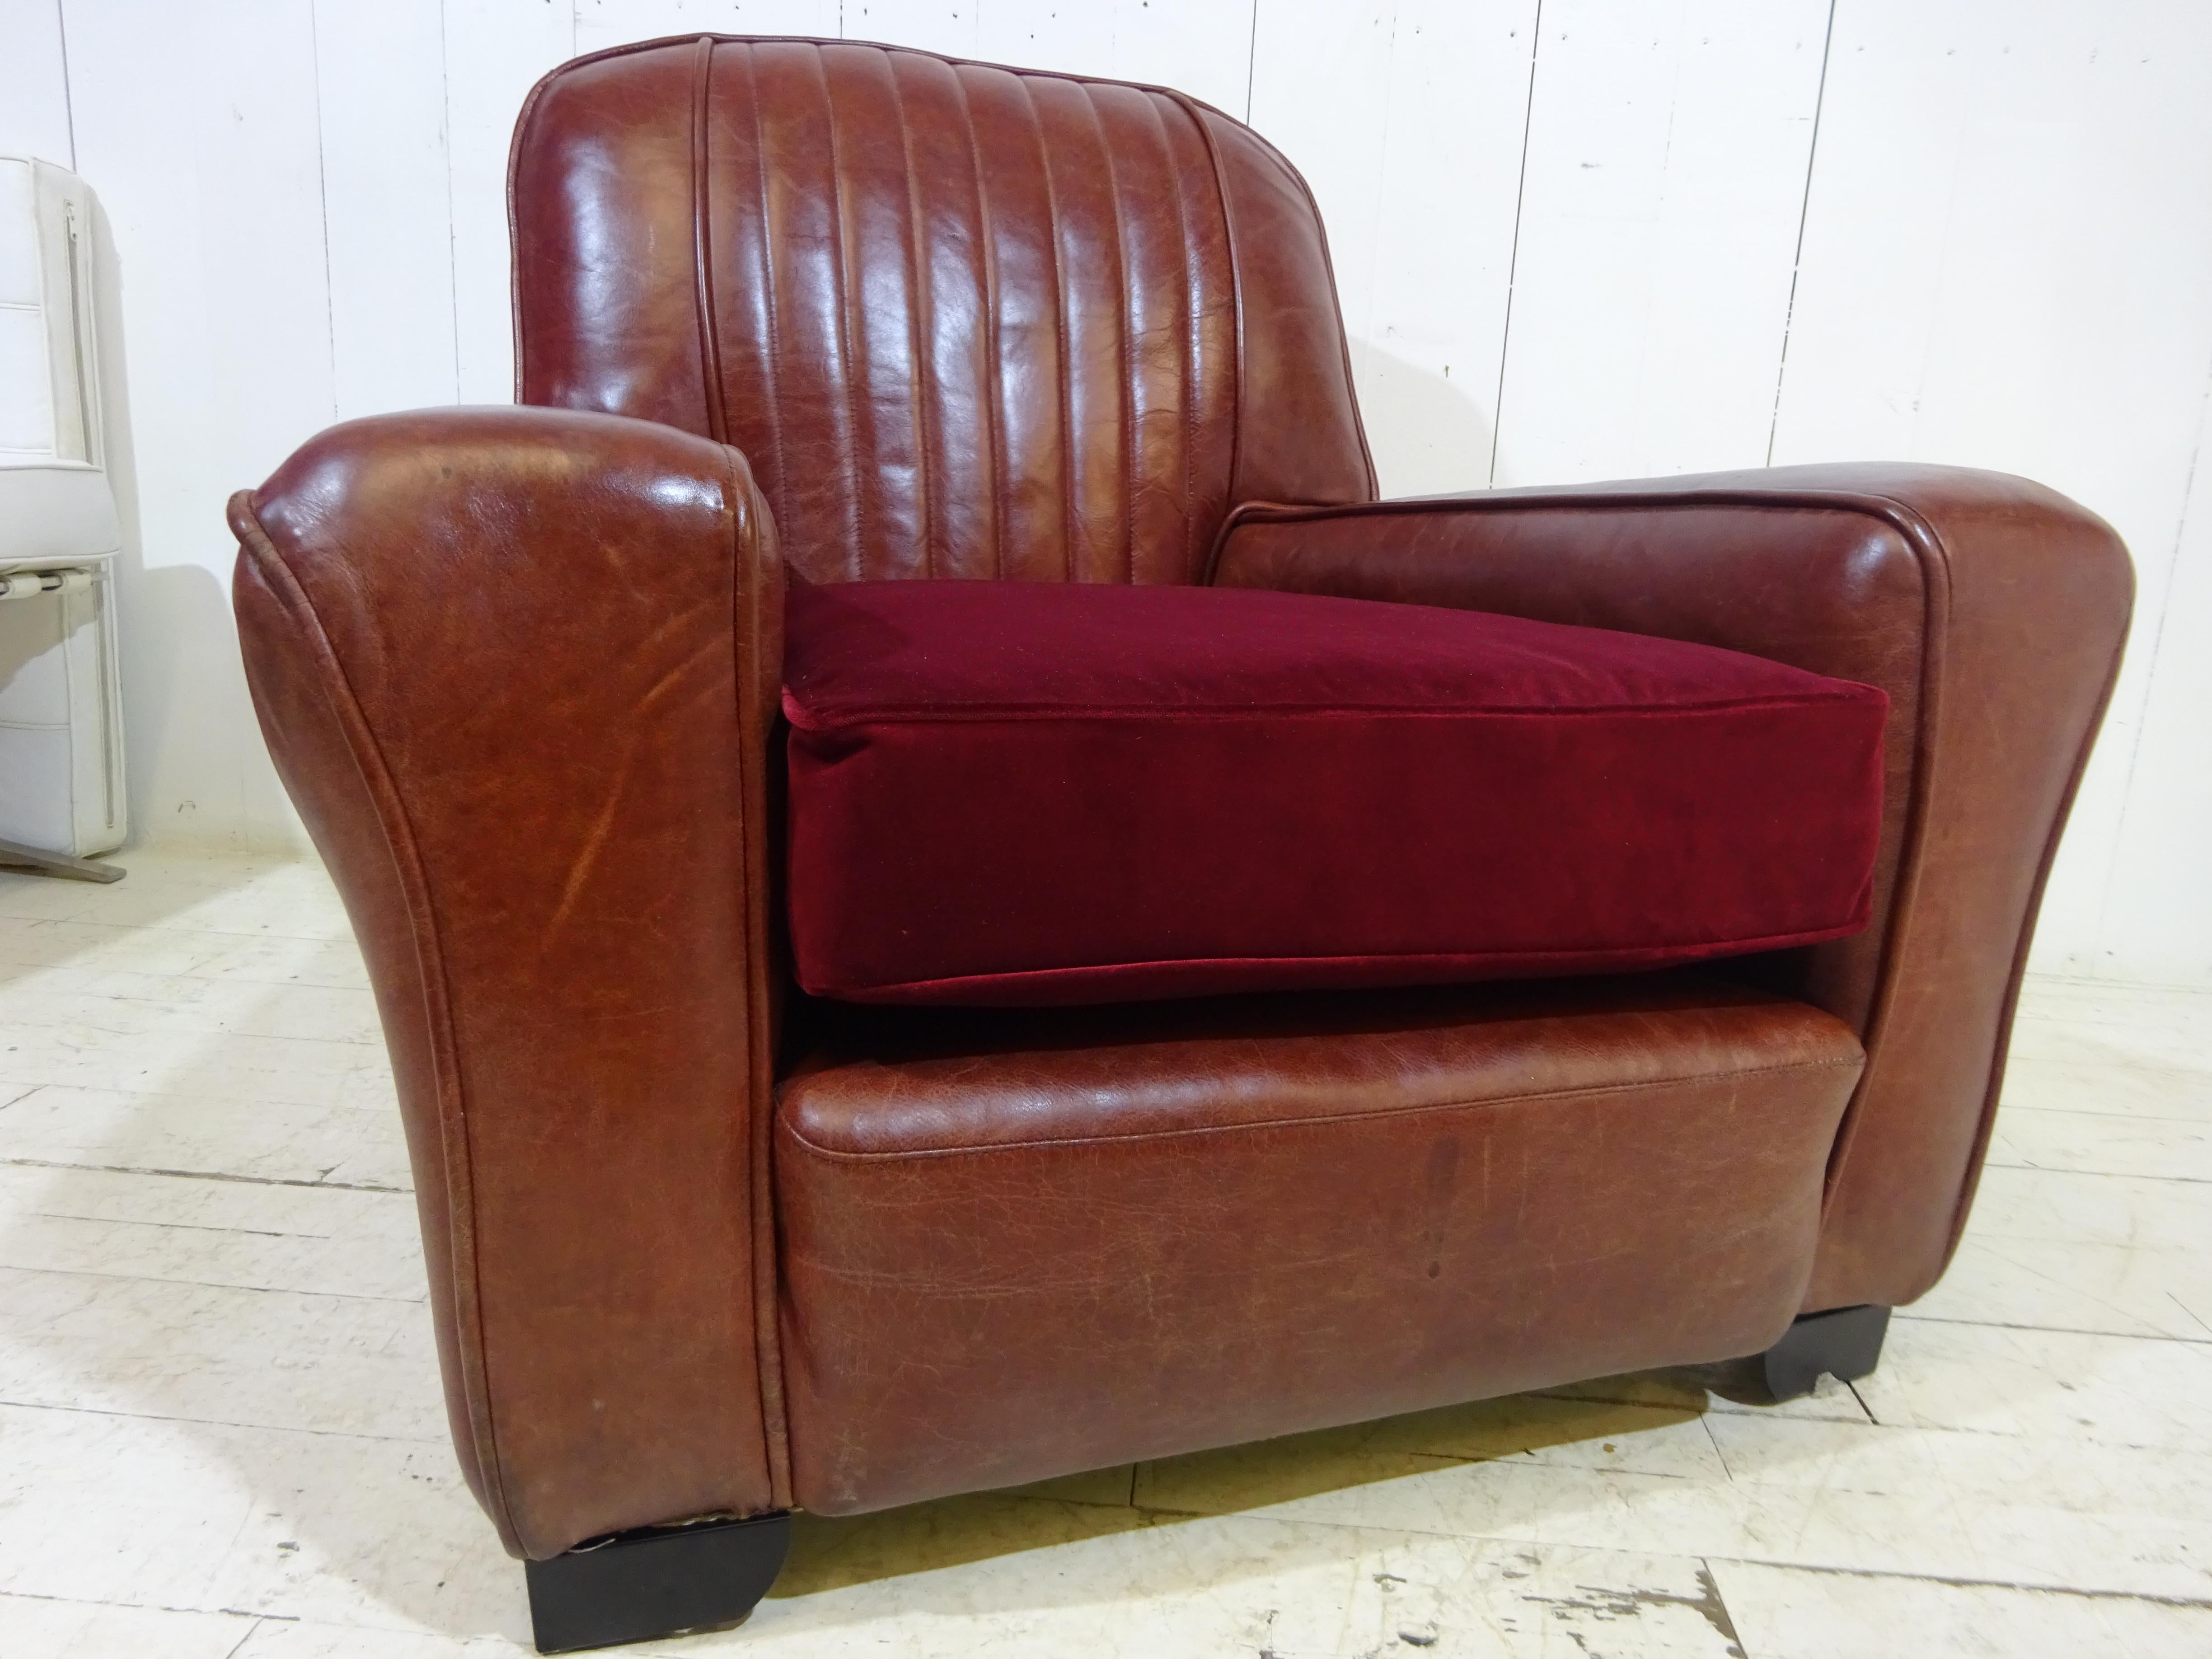 1950's Club Chair

Absolutely love these chairs! Yes, we have a matching pair. 

In the style of a 1950's vintage motor car seat the chair is a special find from the team at The Rare Chair Company. 

Originally, from a London hotel lounge the chair